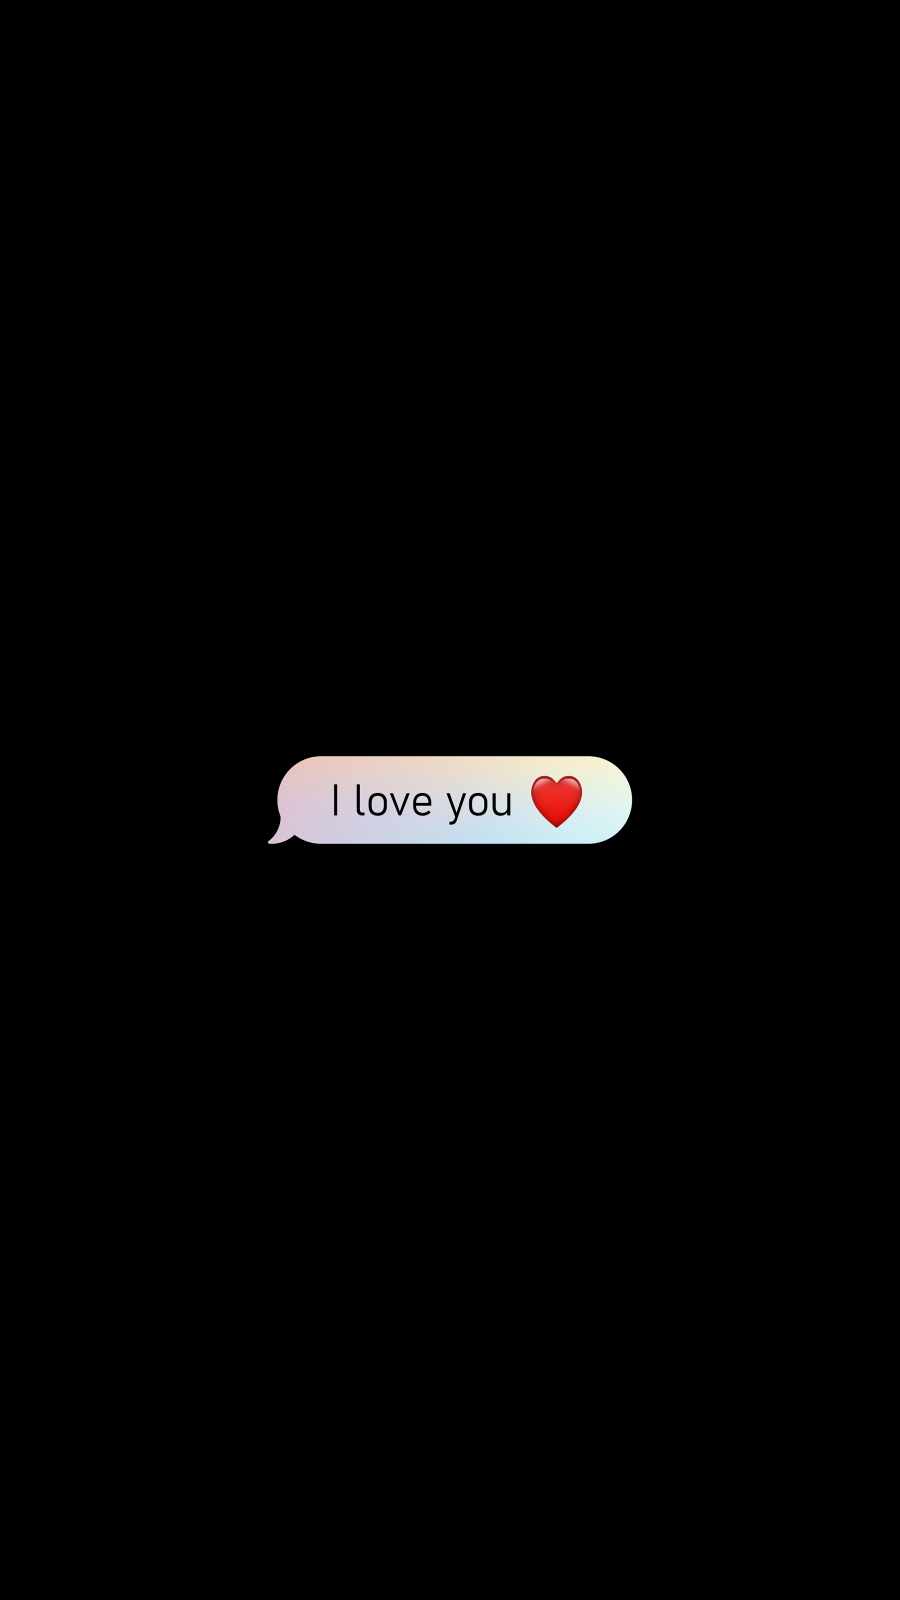 I Love You Texting IPhone Wallpaper - IPhone Wallpapers : iPhone Wallpapers